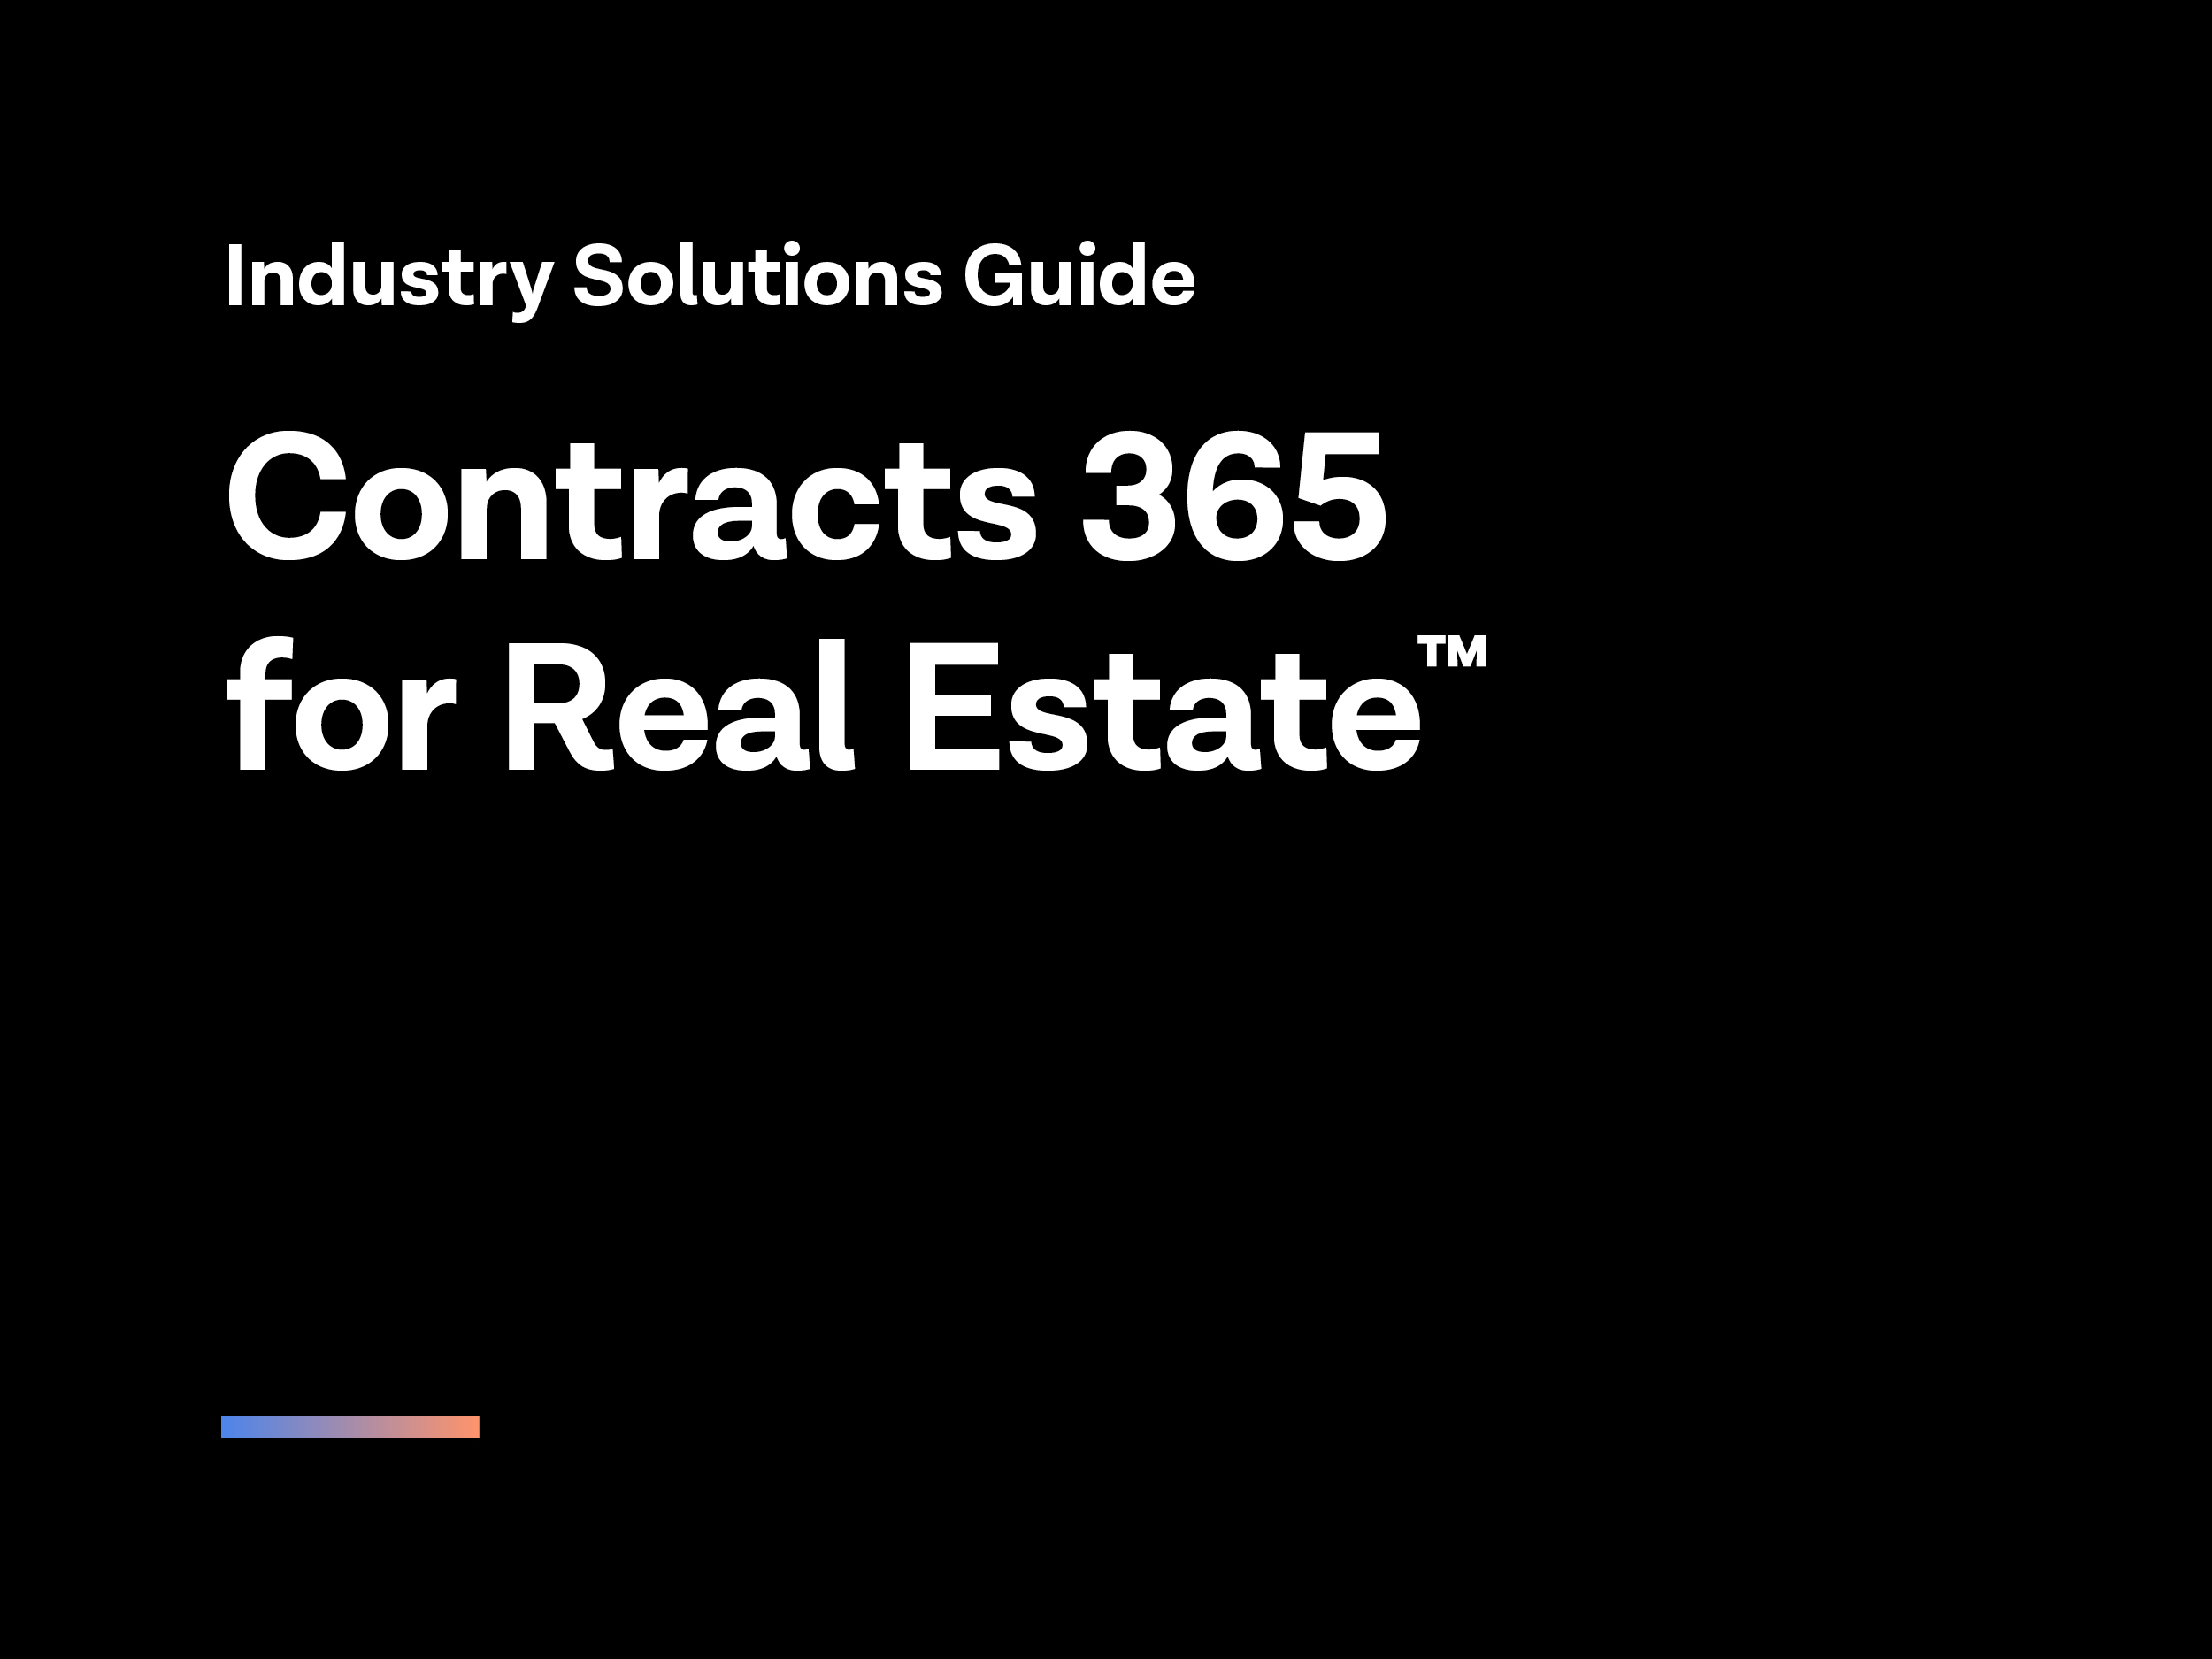 C365-OfferGraphics-IndustrySolutionsGuide-RealEstate